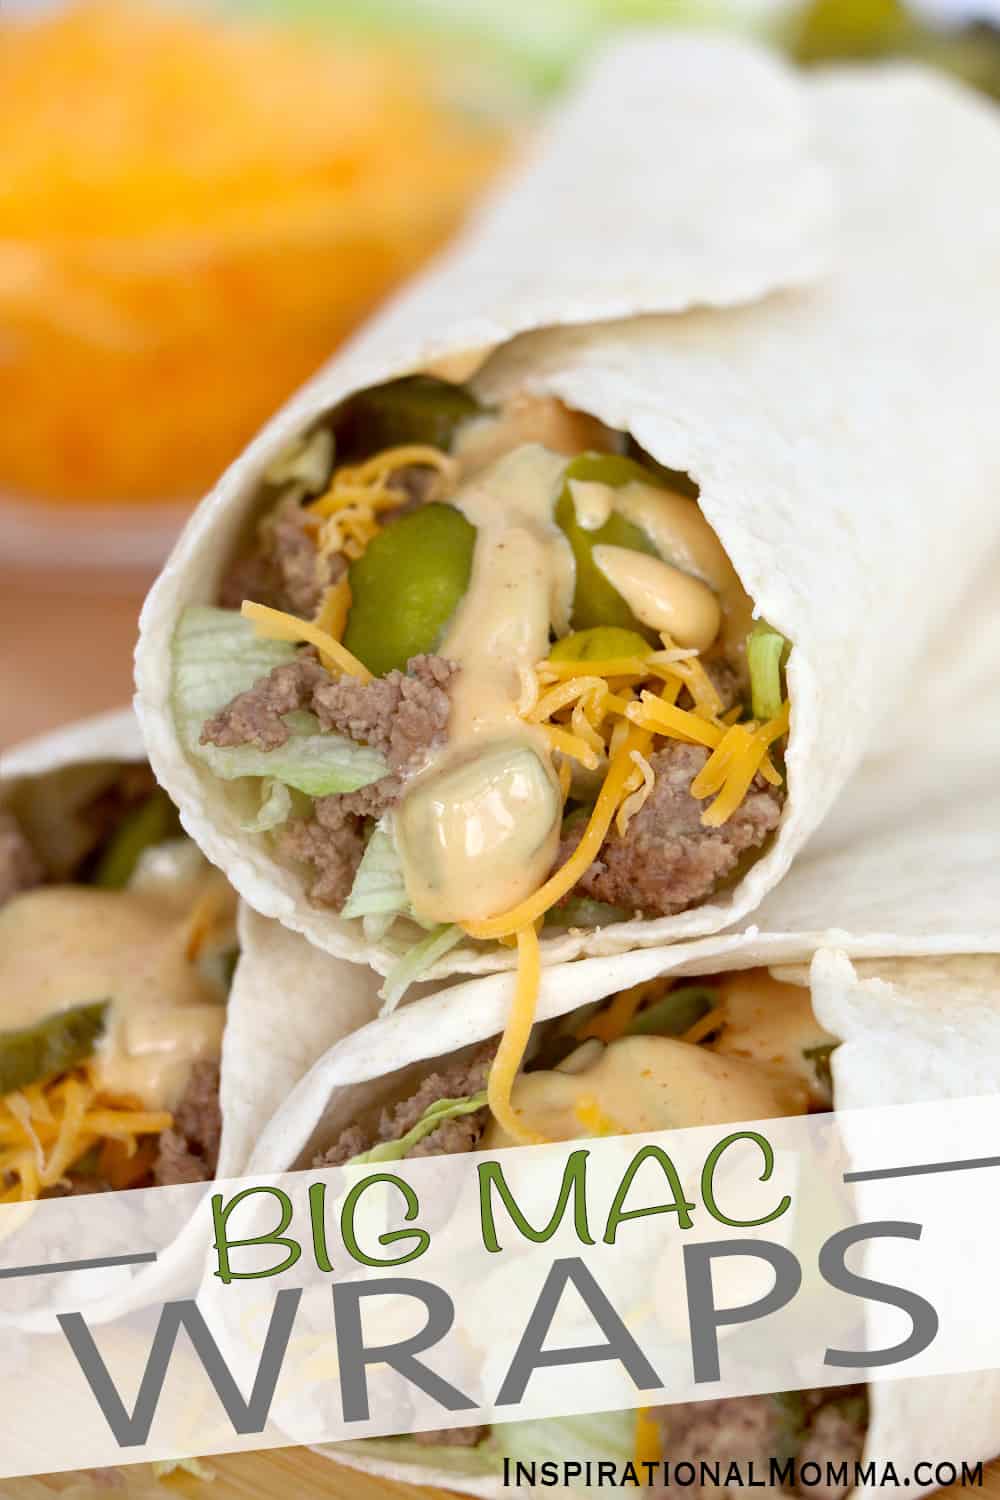 Big Mac Wraps are so simple to make. A perfect combination of beef, pickles, lettuce, cheese, and that special sauce! #inspirationalmomma #bigmacwraps #bigmac #bigmacrecipes bigmacwraprecipes #wraprecipes